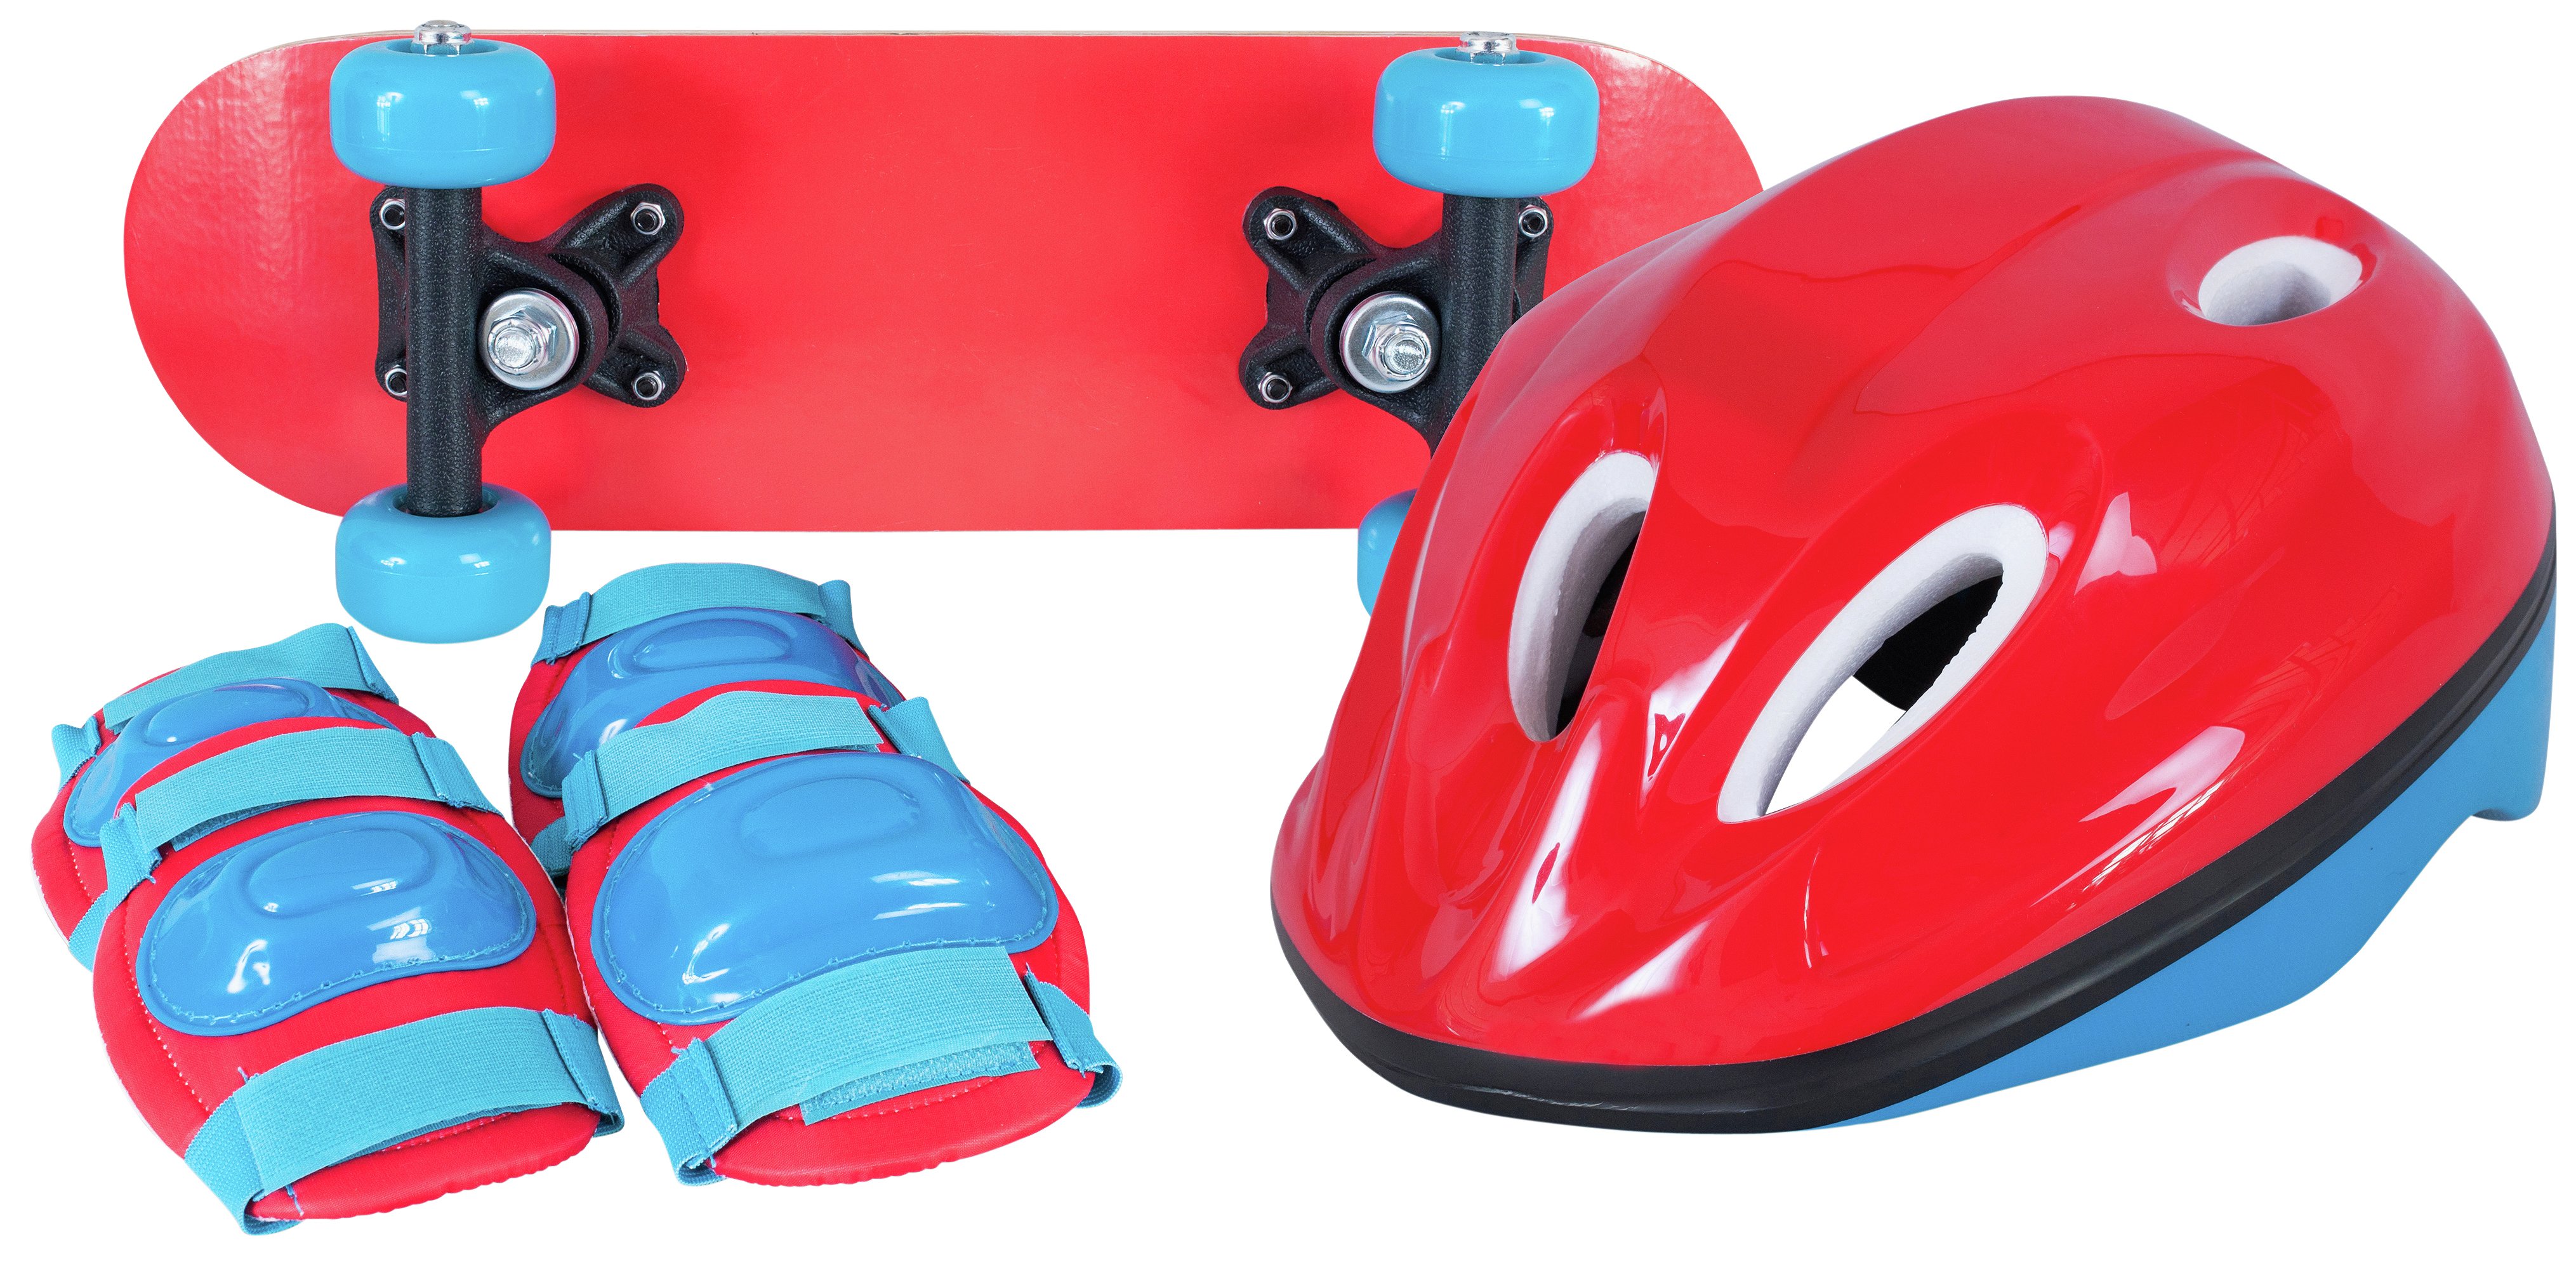 Chad Valley Mini Skateboard and Accessories